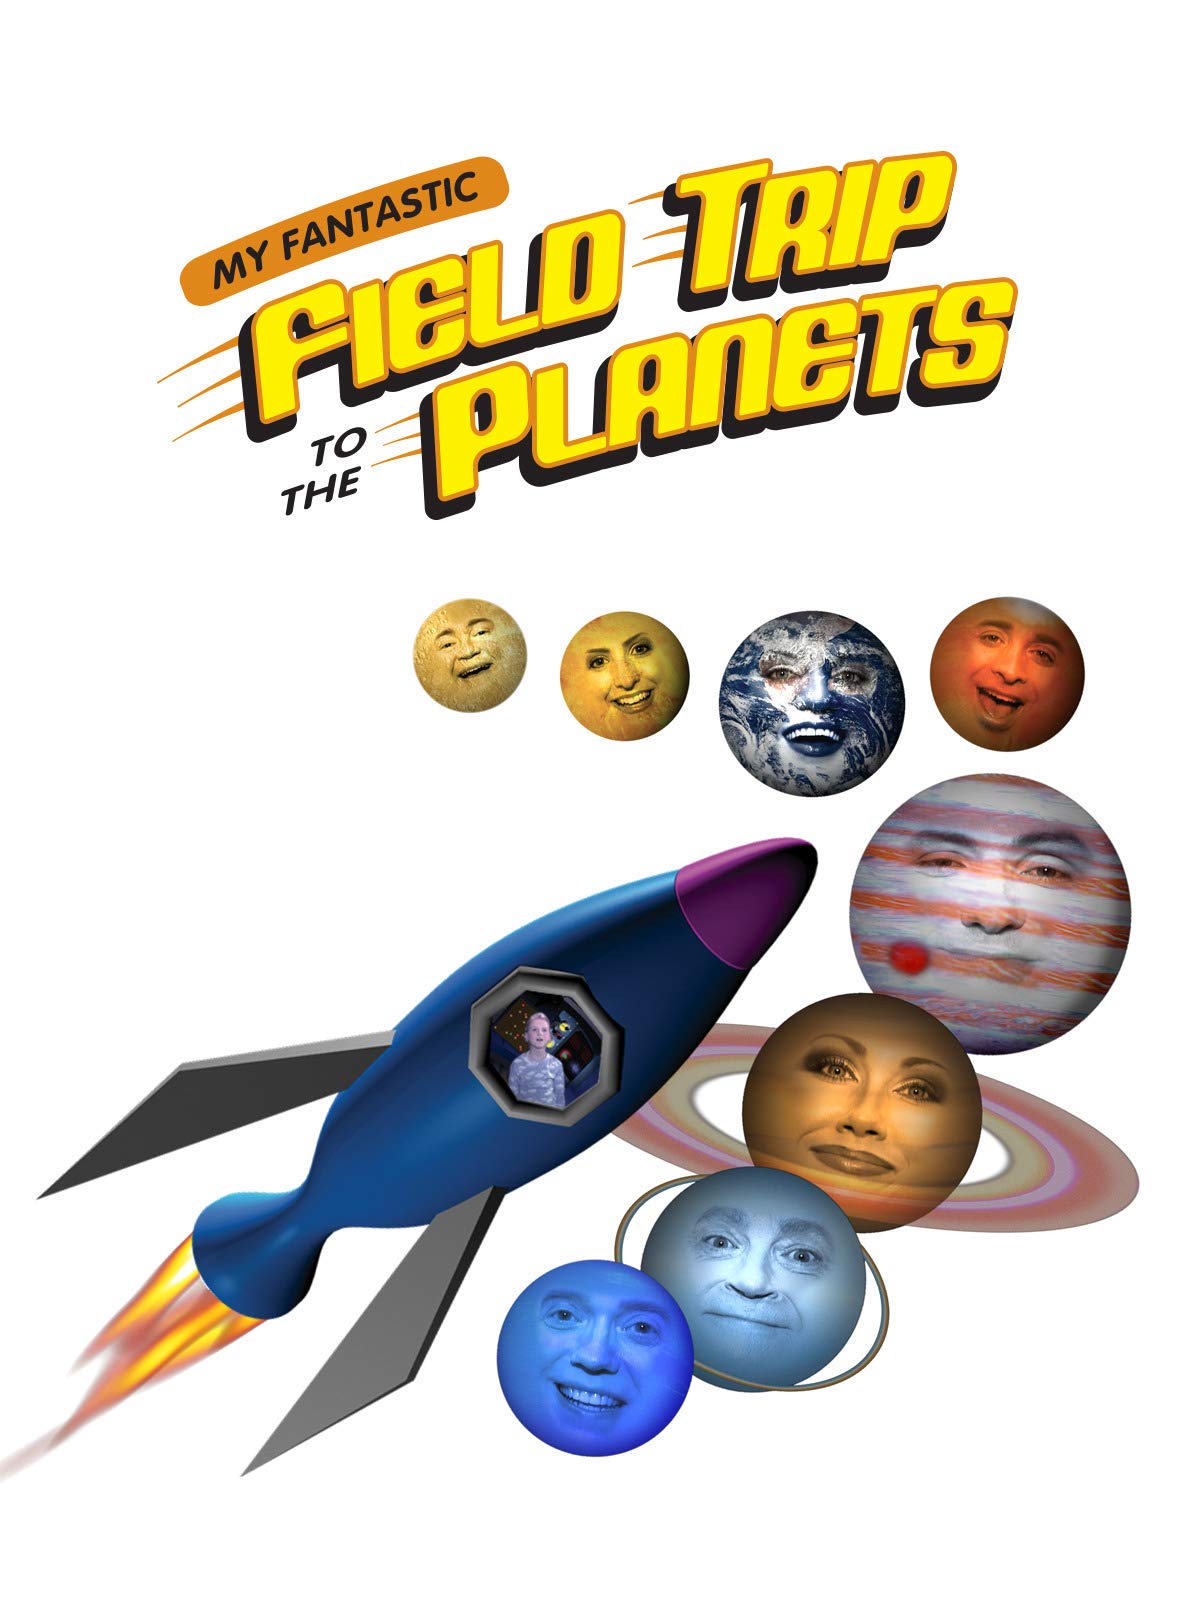 My Fantastic Field Trip to the Planets (2005) Screenshot 2